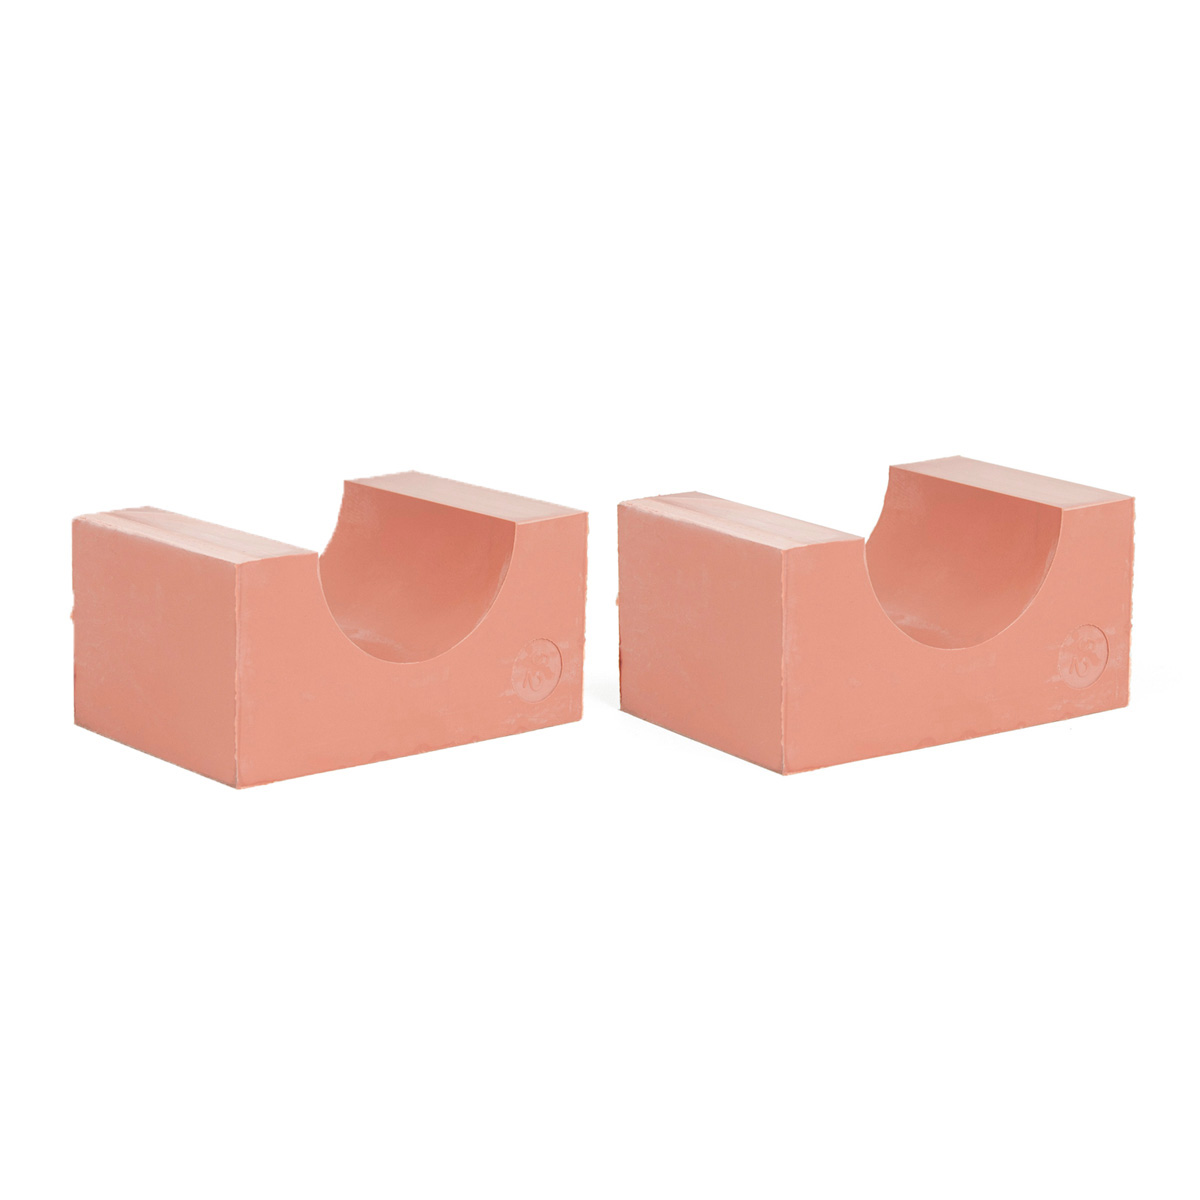 80-54*2 Set of 2 half insert block lycron 80/54 for cable/pipe diam. 53.5-55.5mm